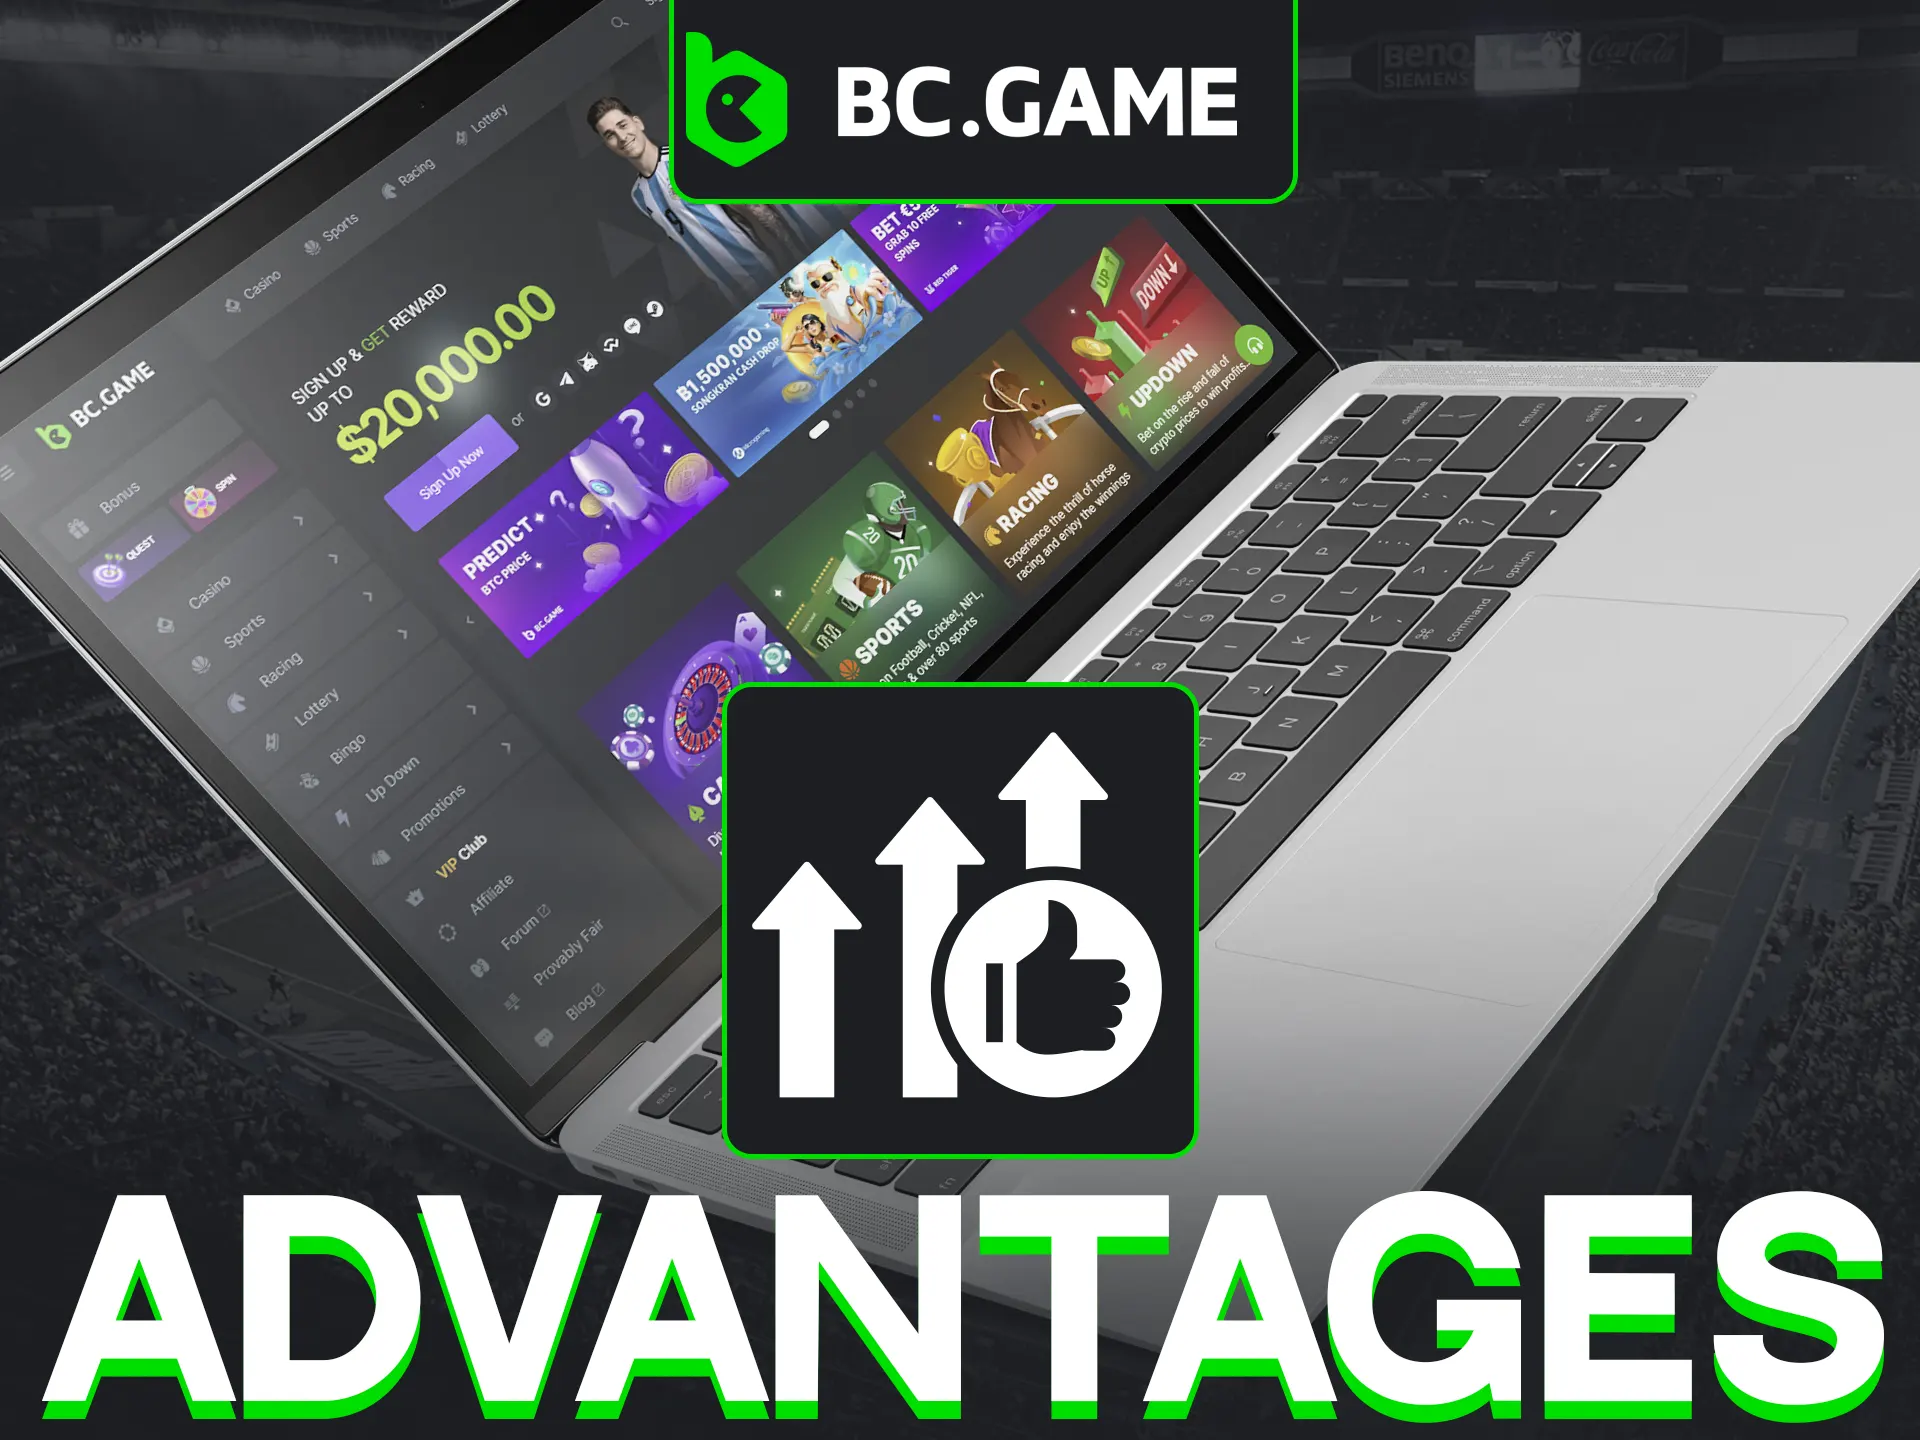 BC Game offers provably fair gaming, instant transactions, anonymity, and support.